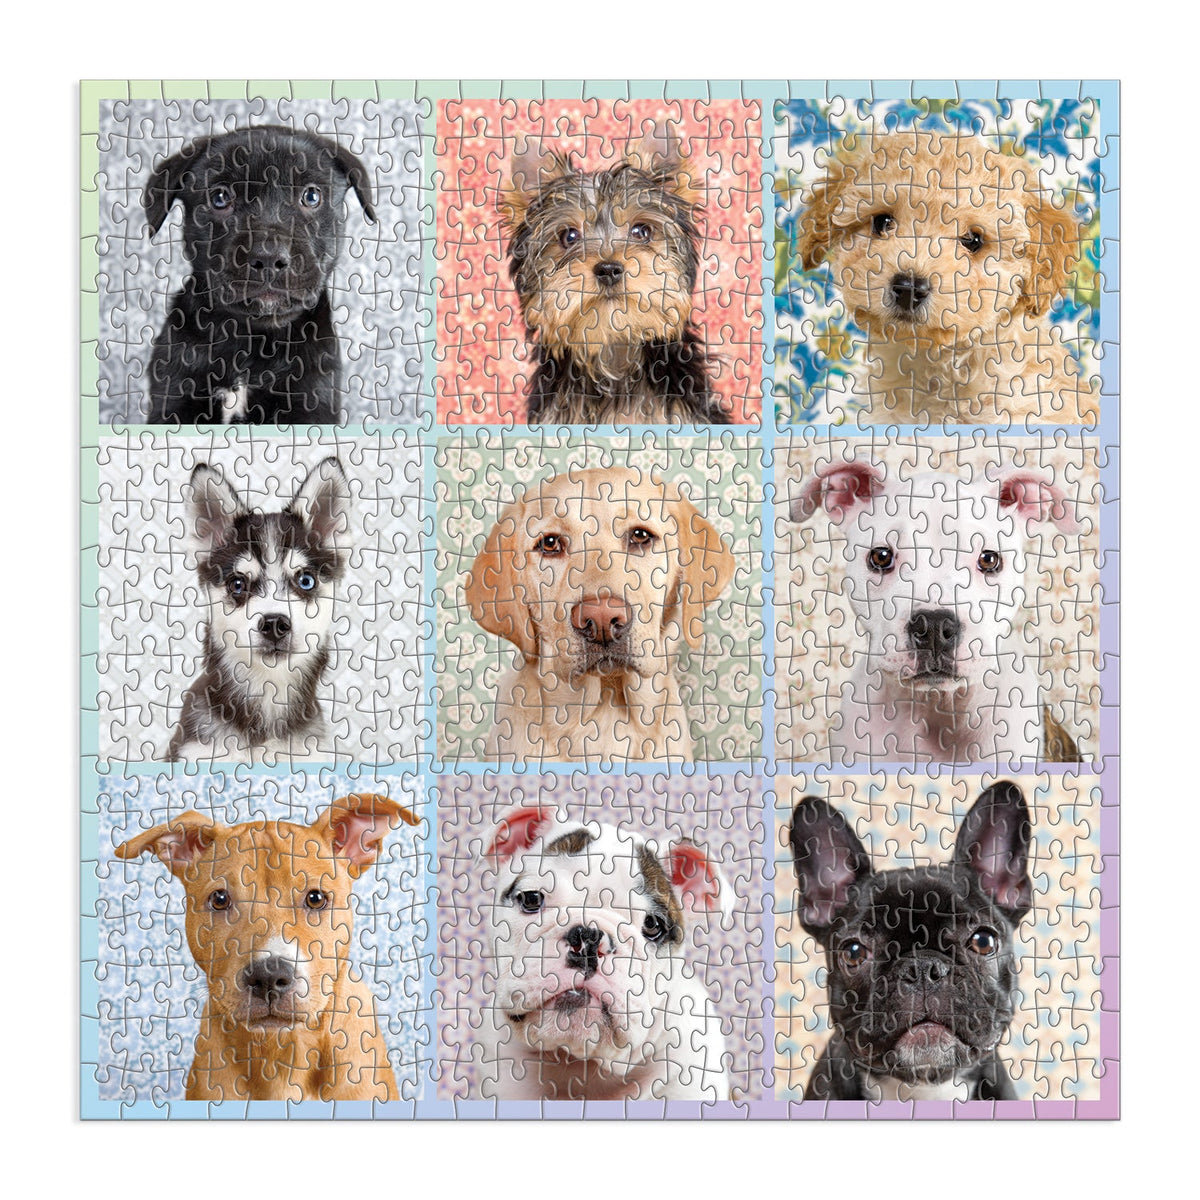 Dog Stamps Collage 500-Piece Jigsaw Puzzle